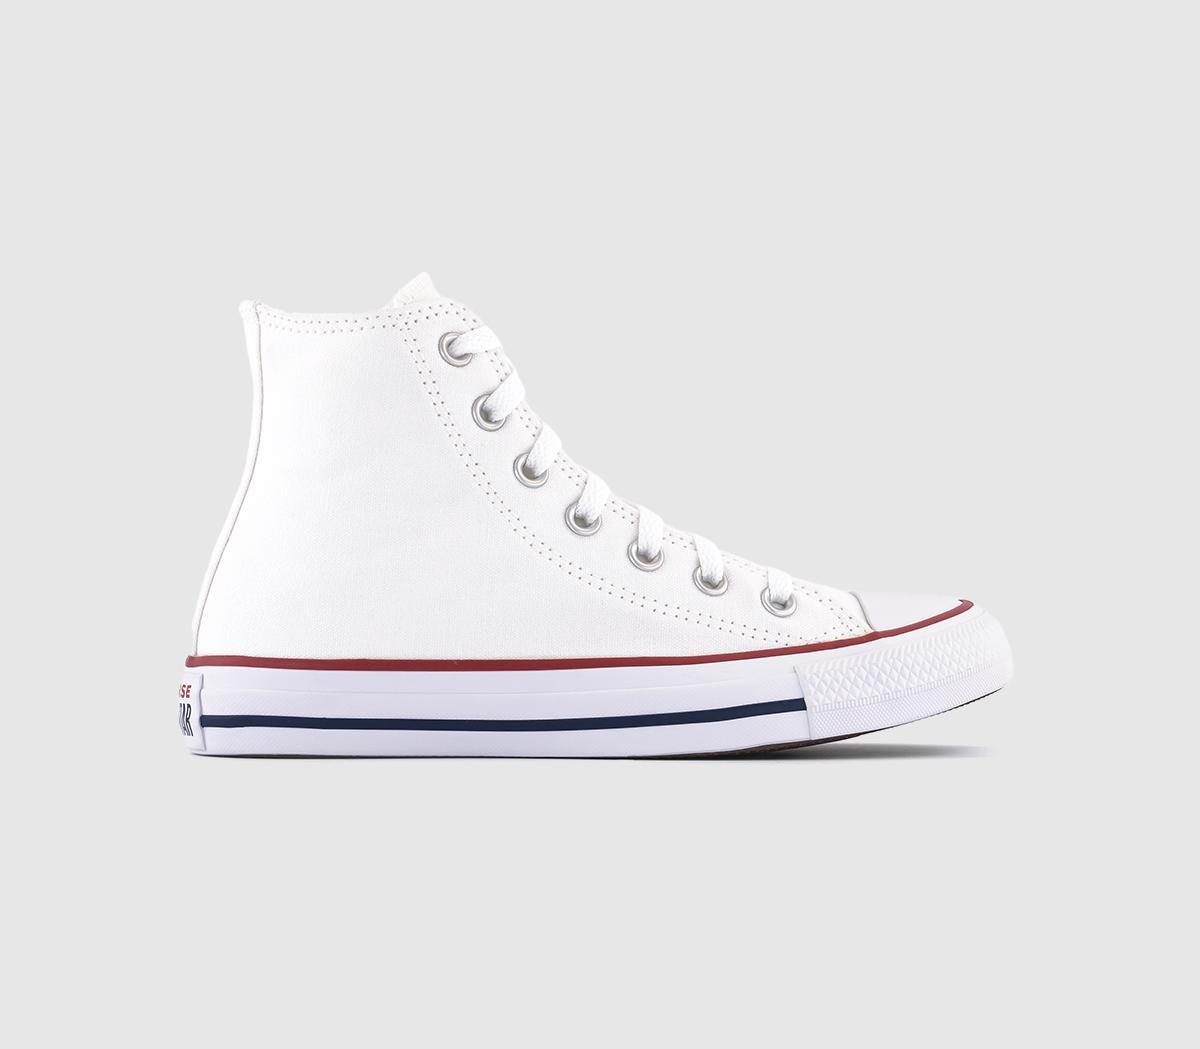 White Shoes: Low Tops, High Tops & Platforms Styles. Converse.com